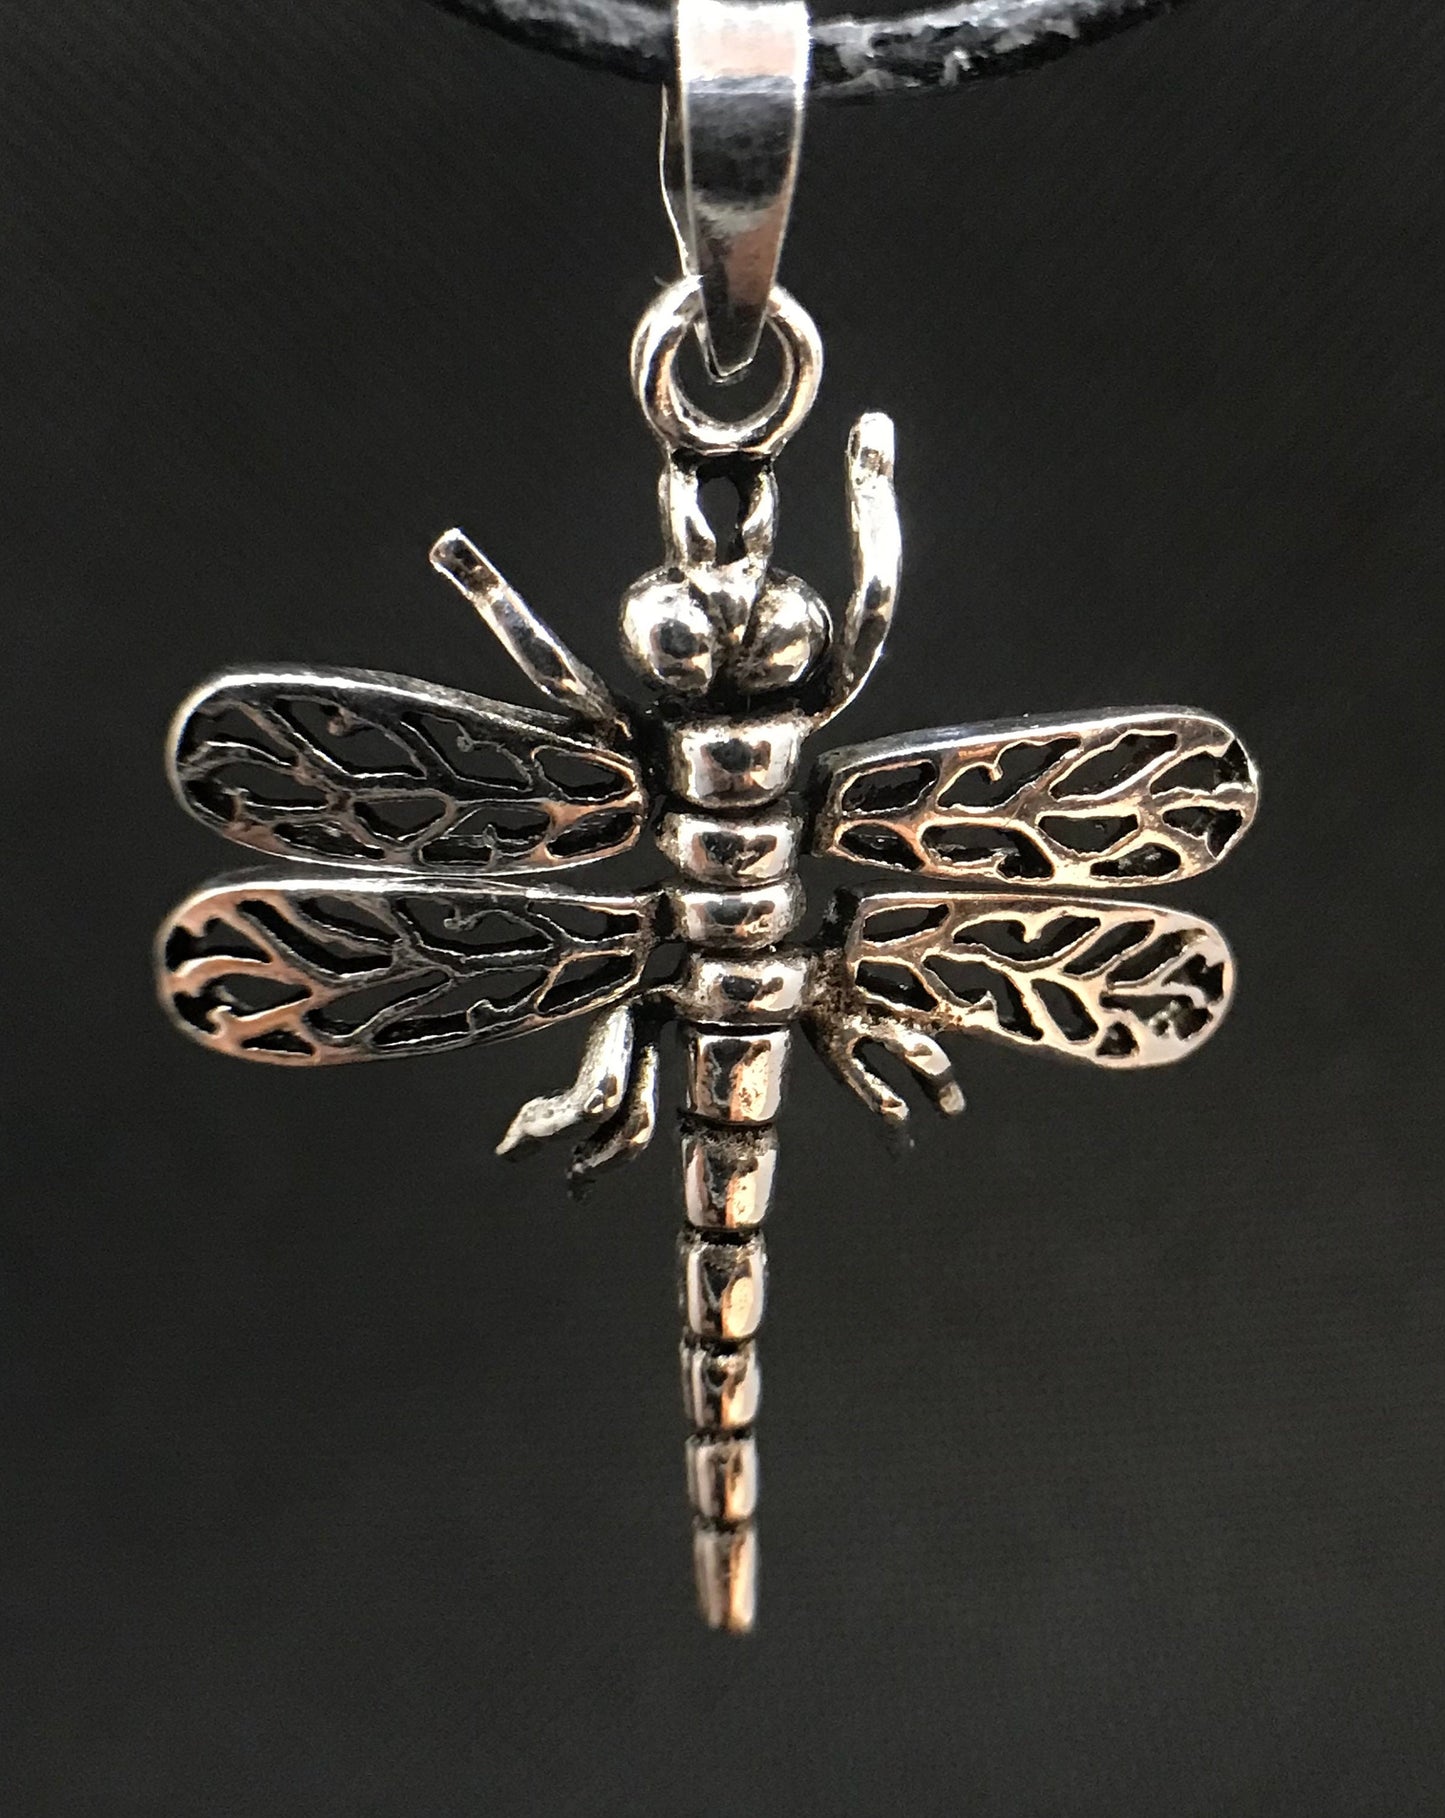 Articulated dragonfly pendant Sterling Silver 925 - TSE049